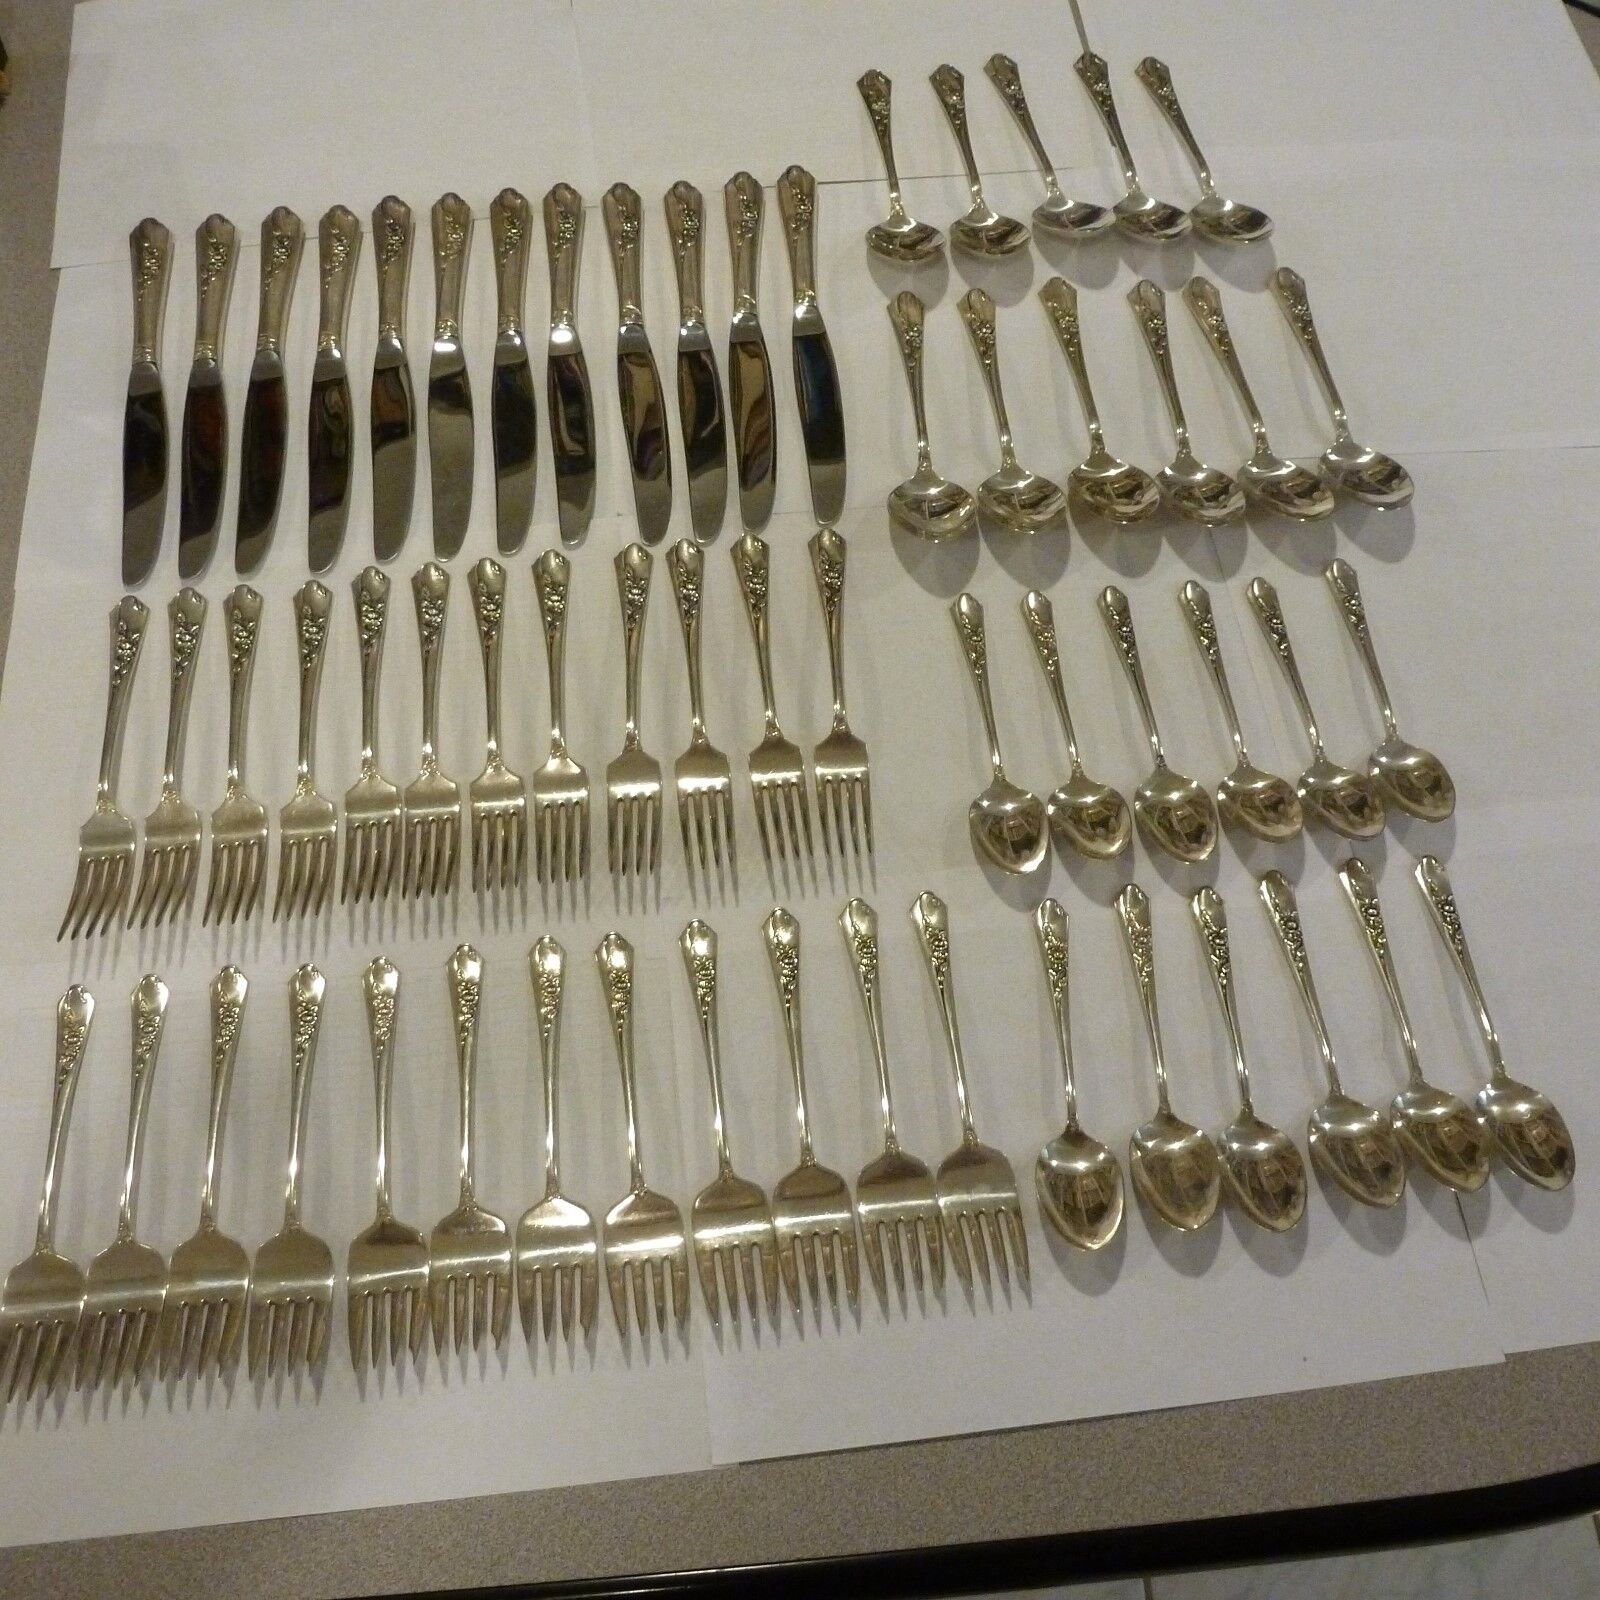 SILVER SONG FRANK M WHITING STERLING SILVER SERVICE FOR 12-5PL SET-1-SPOON 59PC 